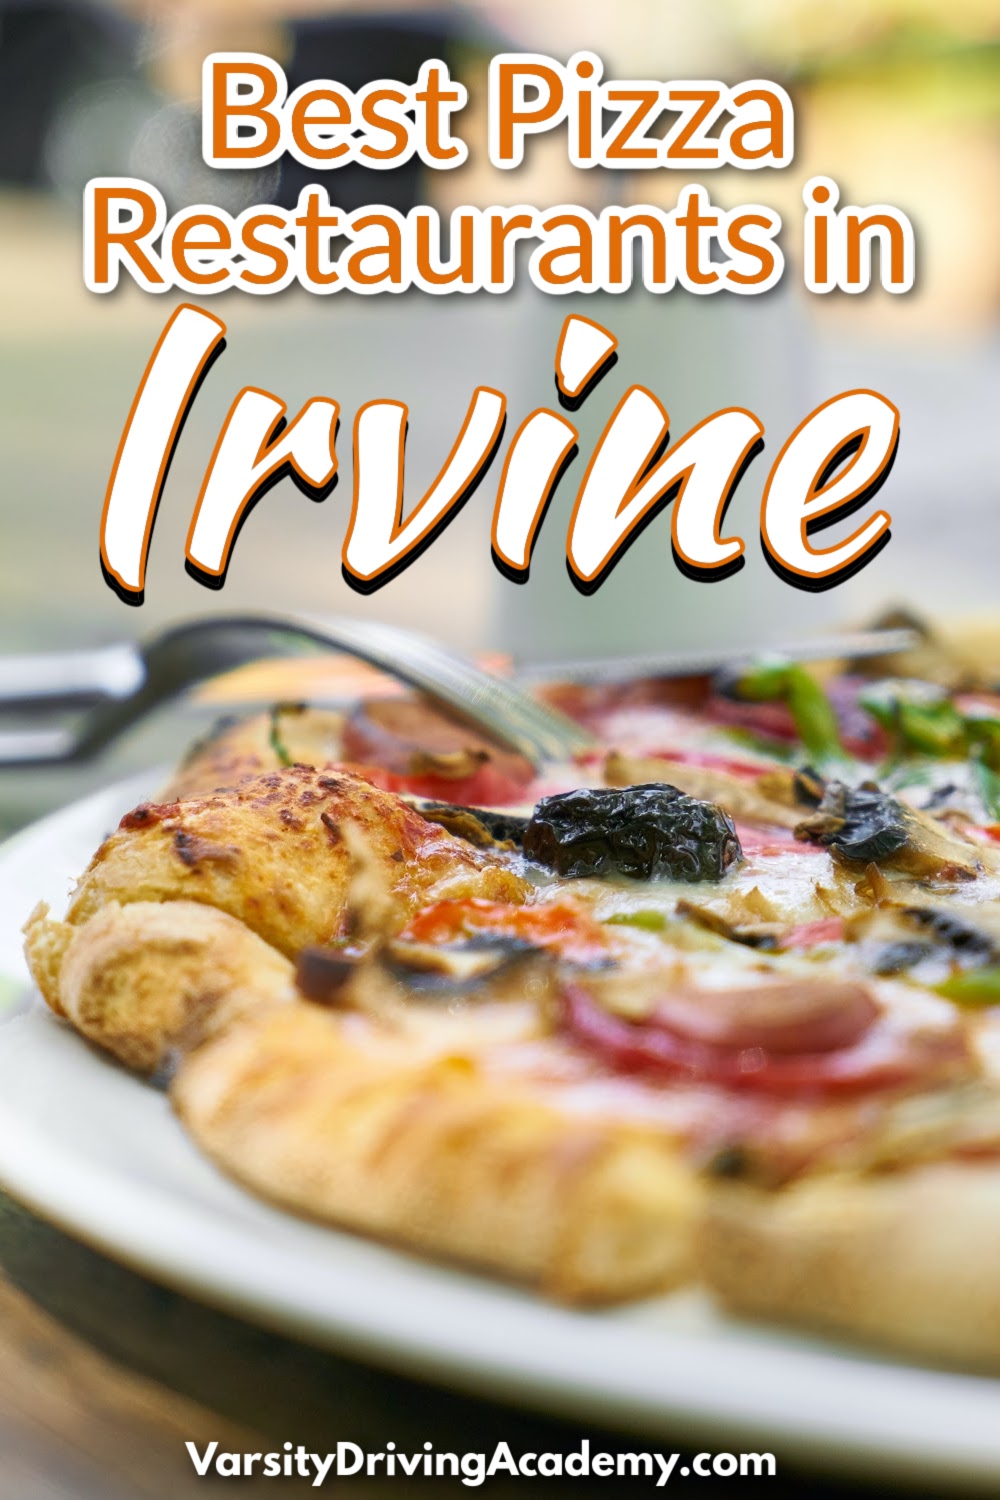 Stay in, stay safe, and order some of the best Irvine pizza restaurants with delivery, amazing pizzas, and amazing service.